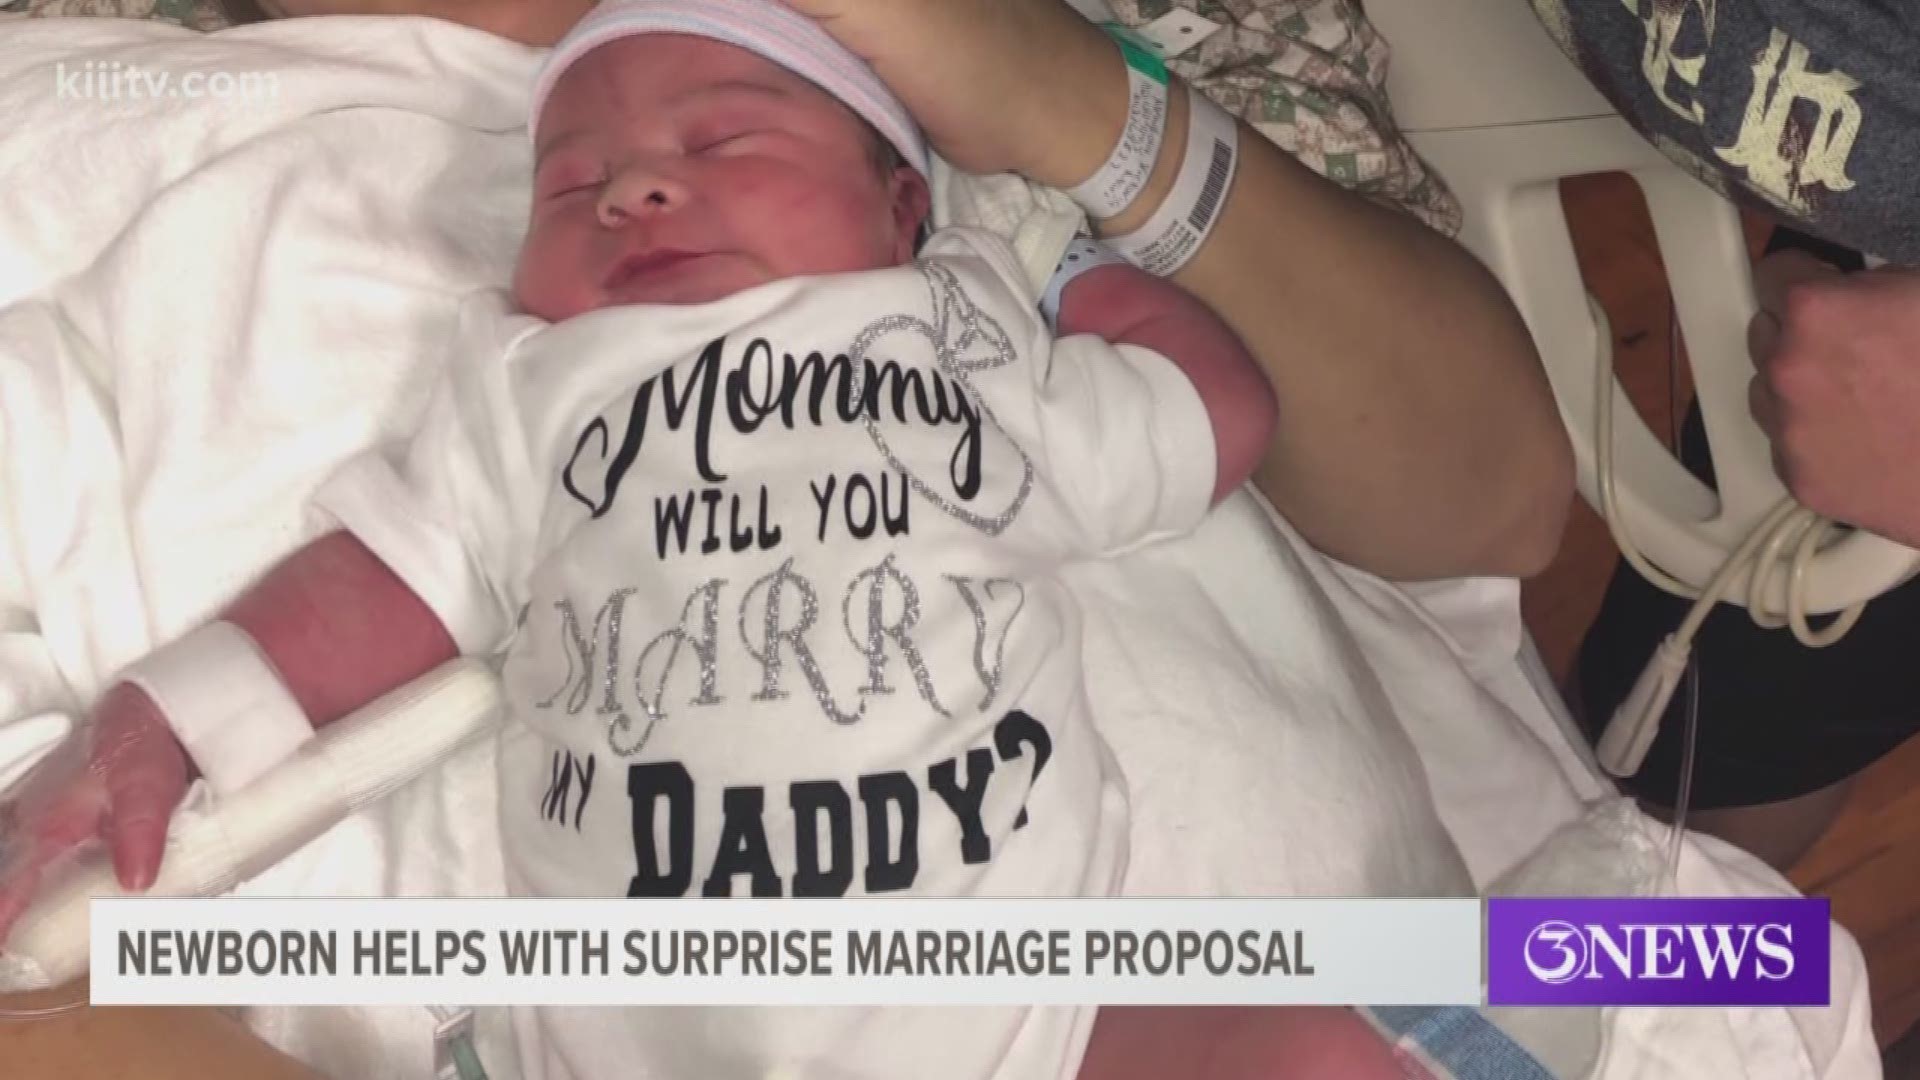 Lawrence Bergstrom pulled out a special onesie that read, "Mommy will you marry my Daddy?"